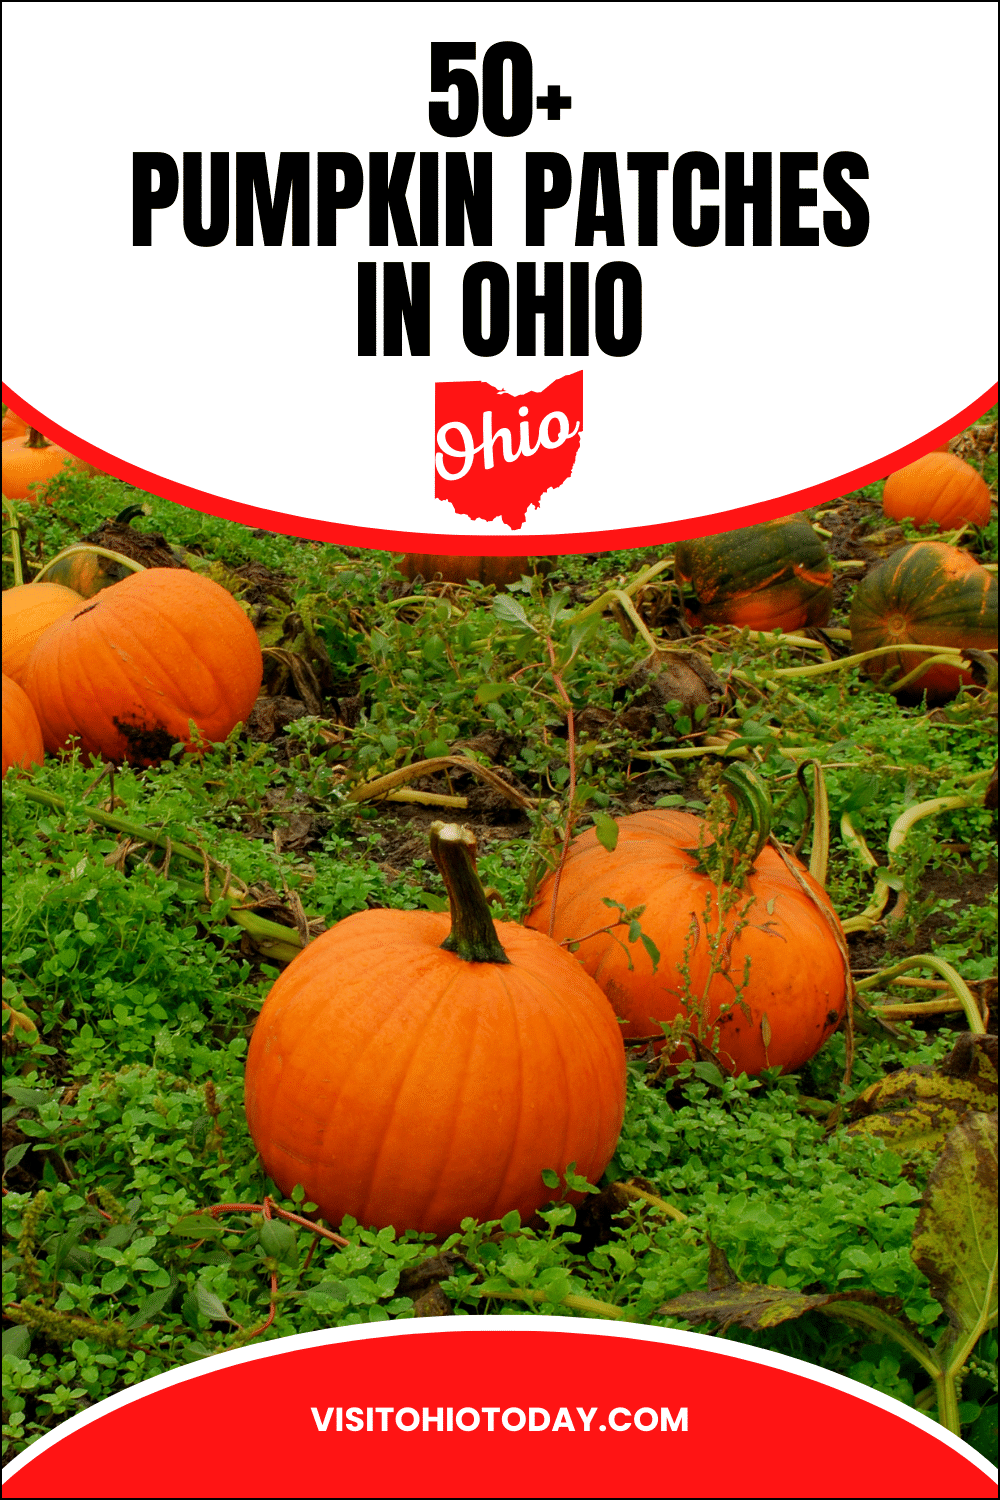 vertical image with a photo of a pumpkin patch with orange pumpkins. A white area across the top has the text 50+ pumpkin patches in Ohio